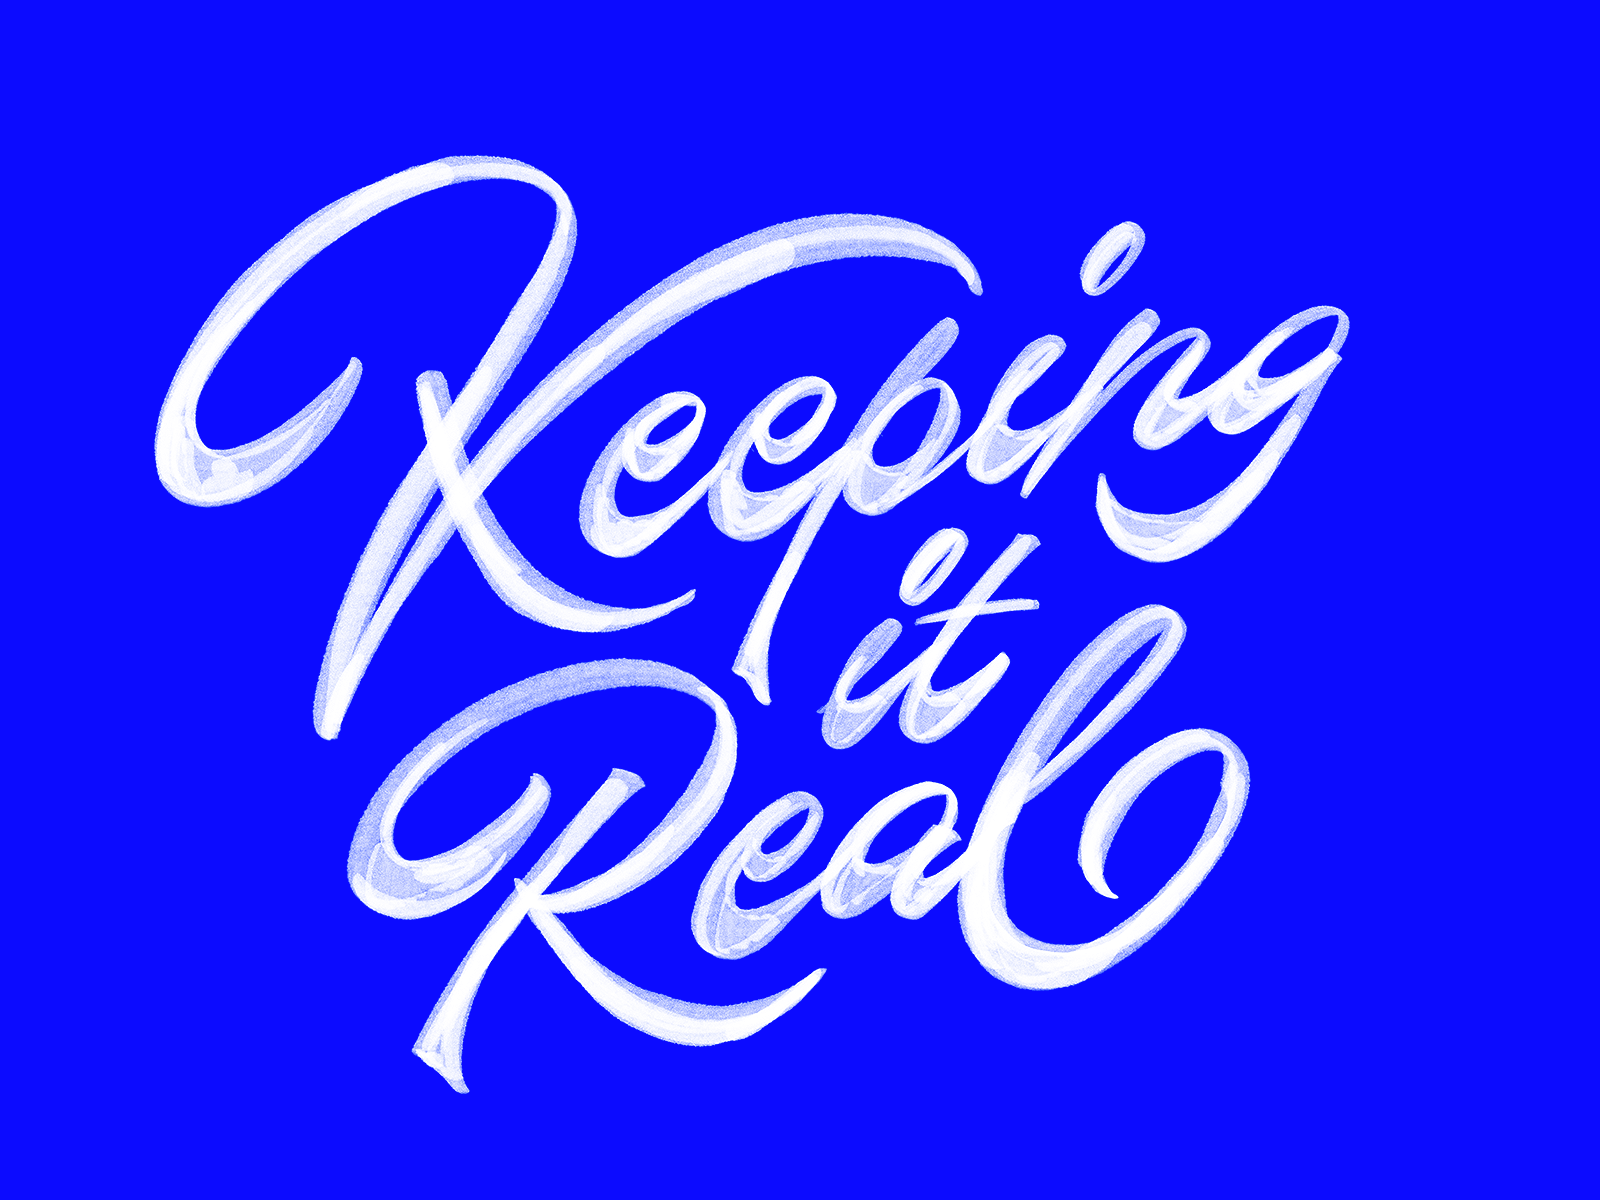 Keeping It Real by Michael Moodie on Dribbble